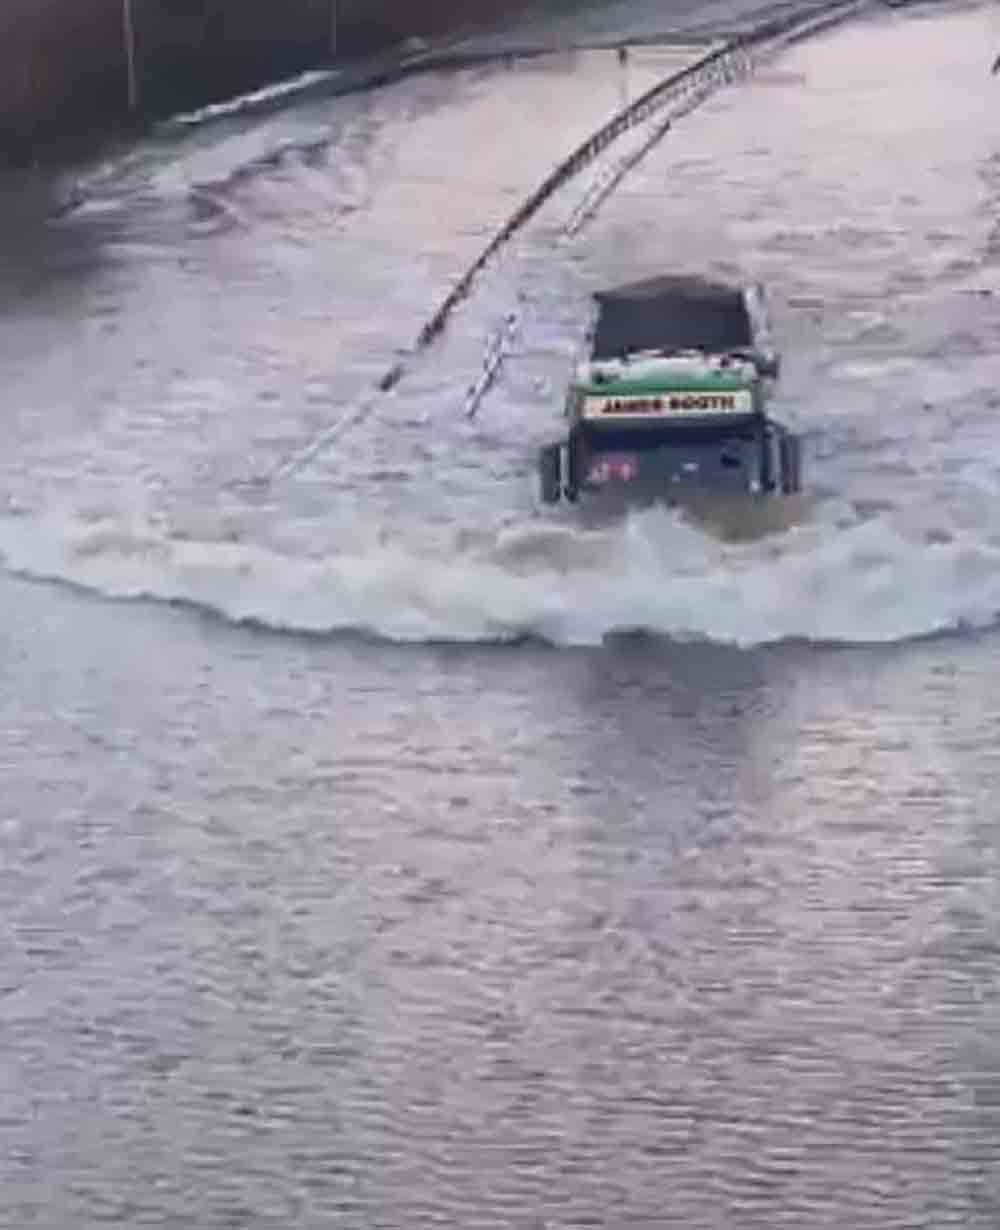 VIDEO shows a determined lorry driver ploughing through a heavily flooded carriageway - Video News UK